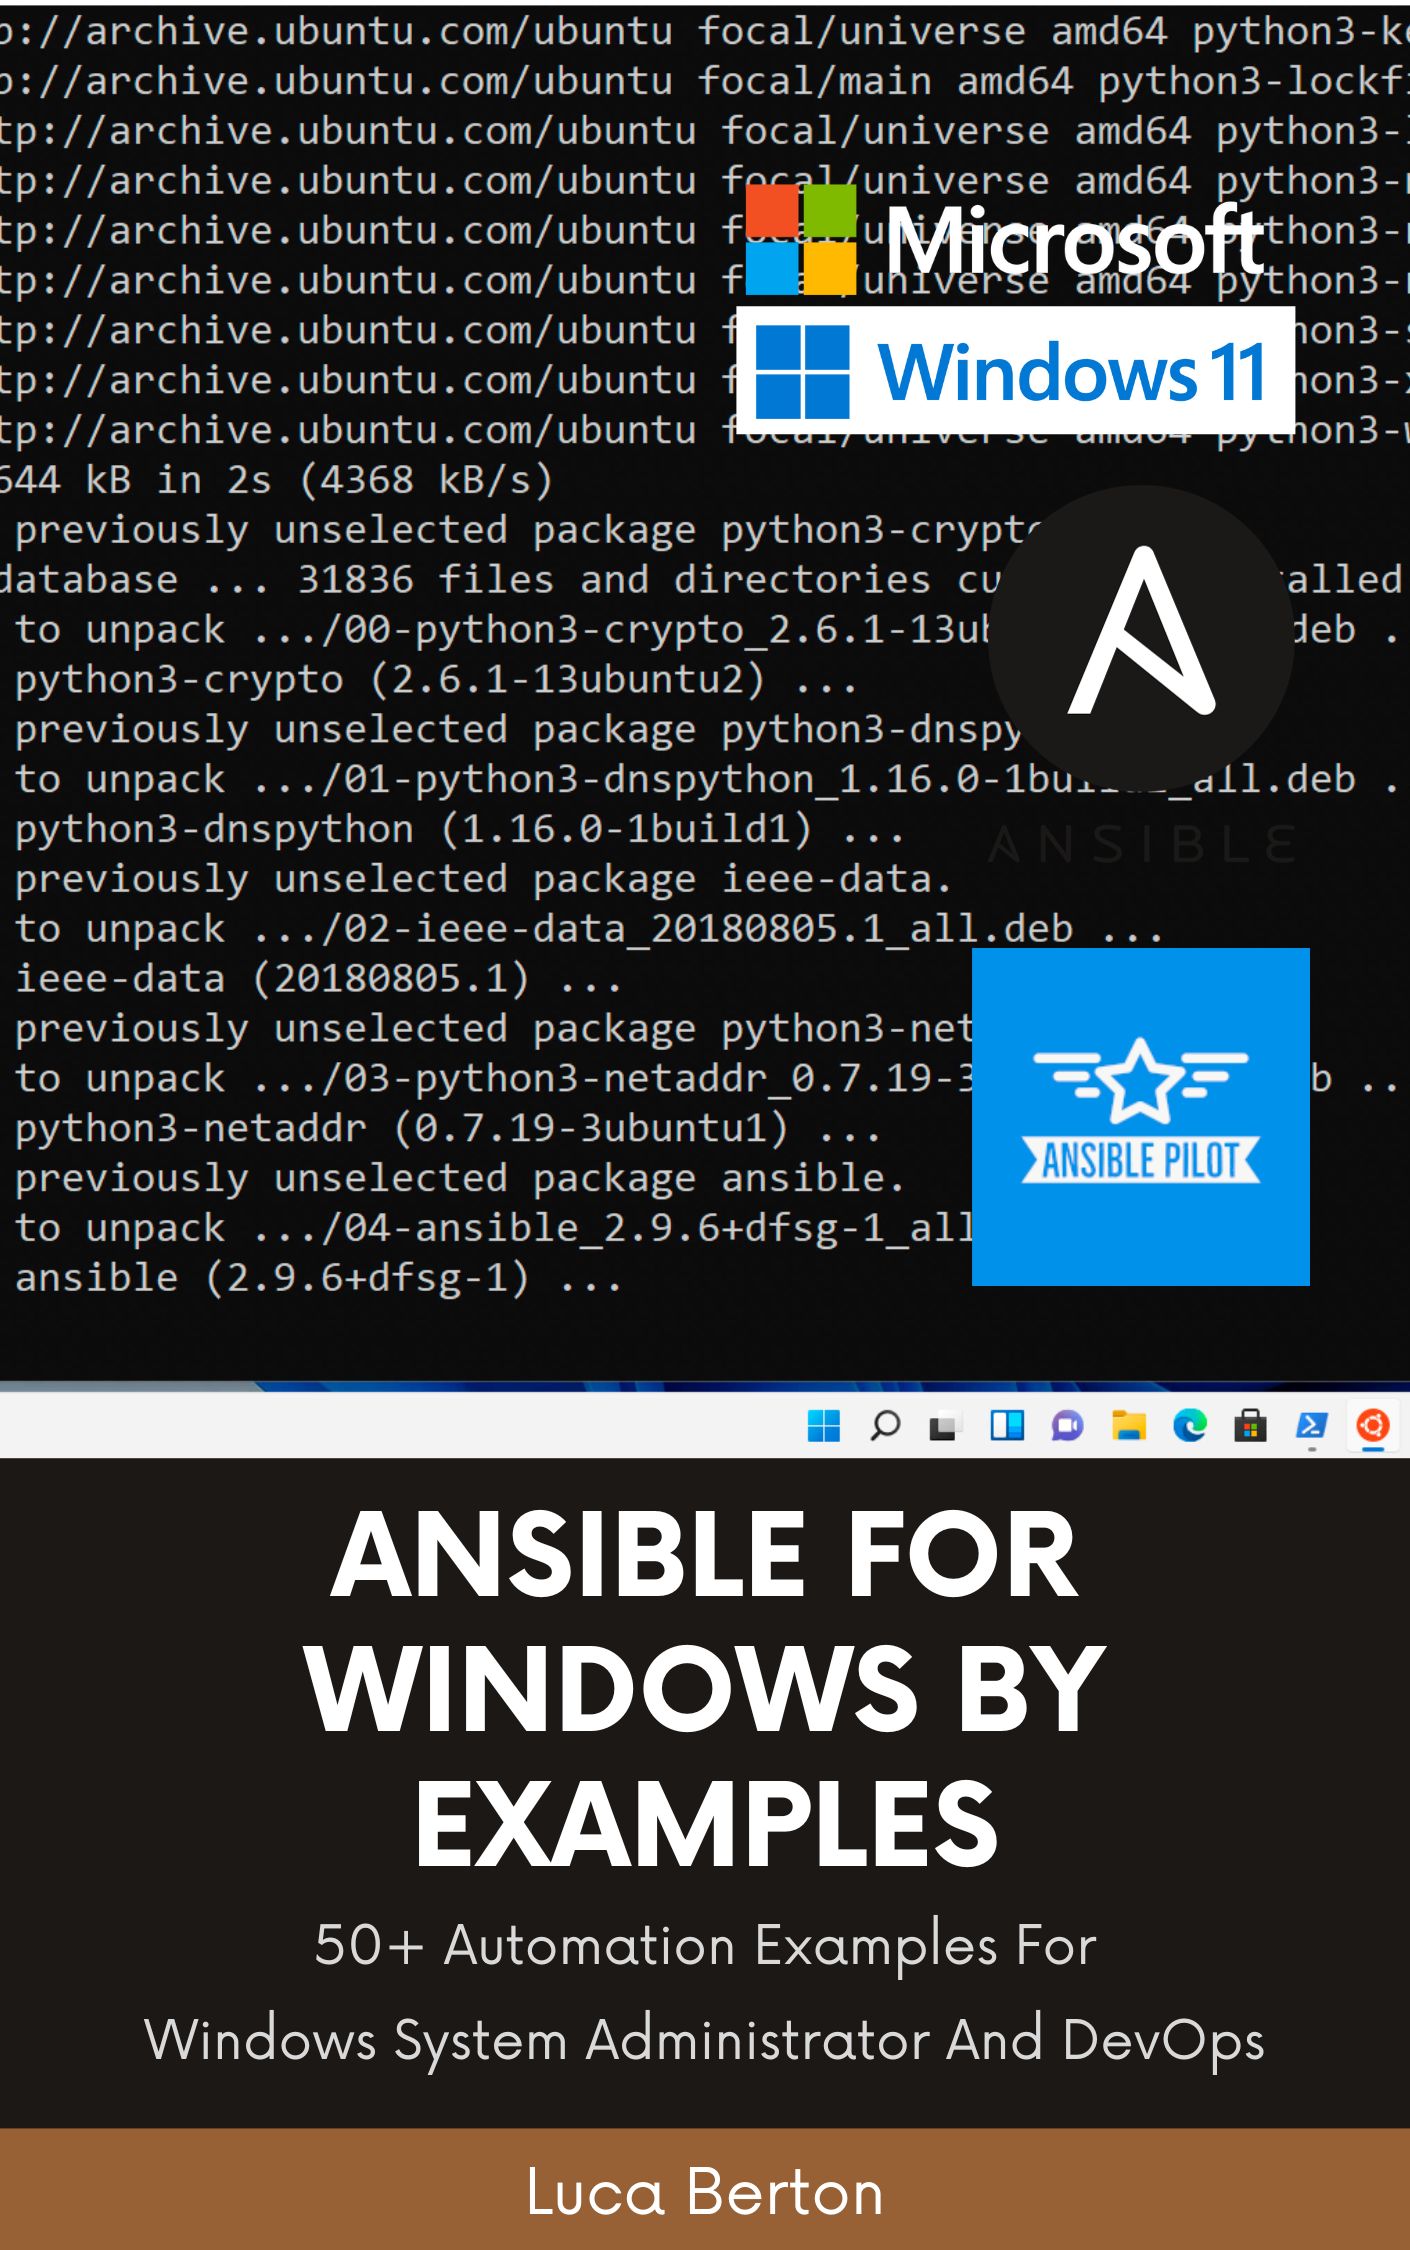 Ansible For Windows By Examples: 50+ Automation Examples For Windows System Administrator And DevOps